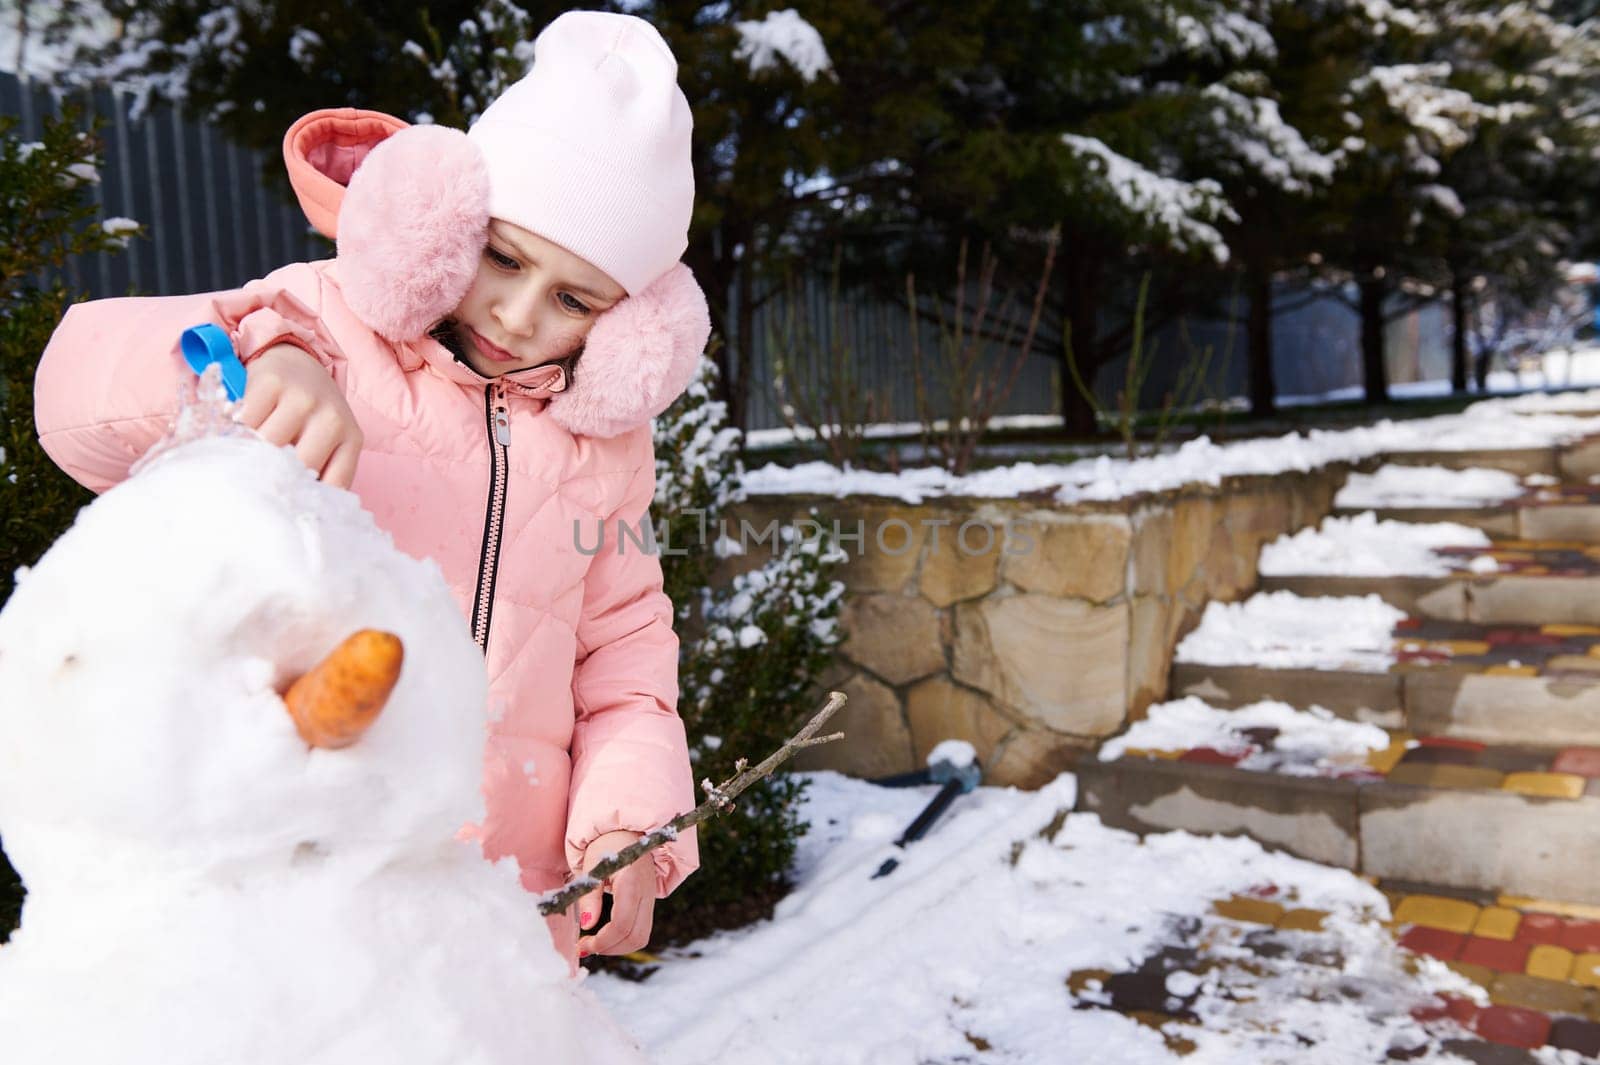 Caucasian lovely little kid girl 5 years old, dressed in pink down jacket and stylish fluffy earmuffs holding a shovel and building a snowman outdoors. Leisure activities and games at wintertime